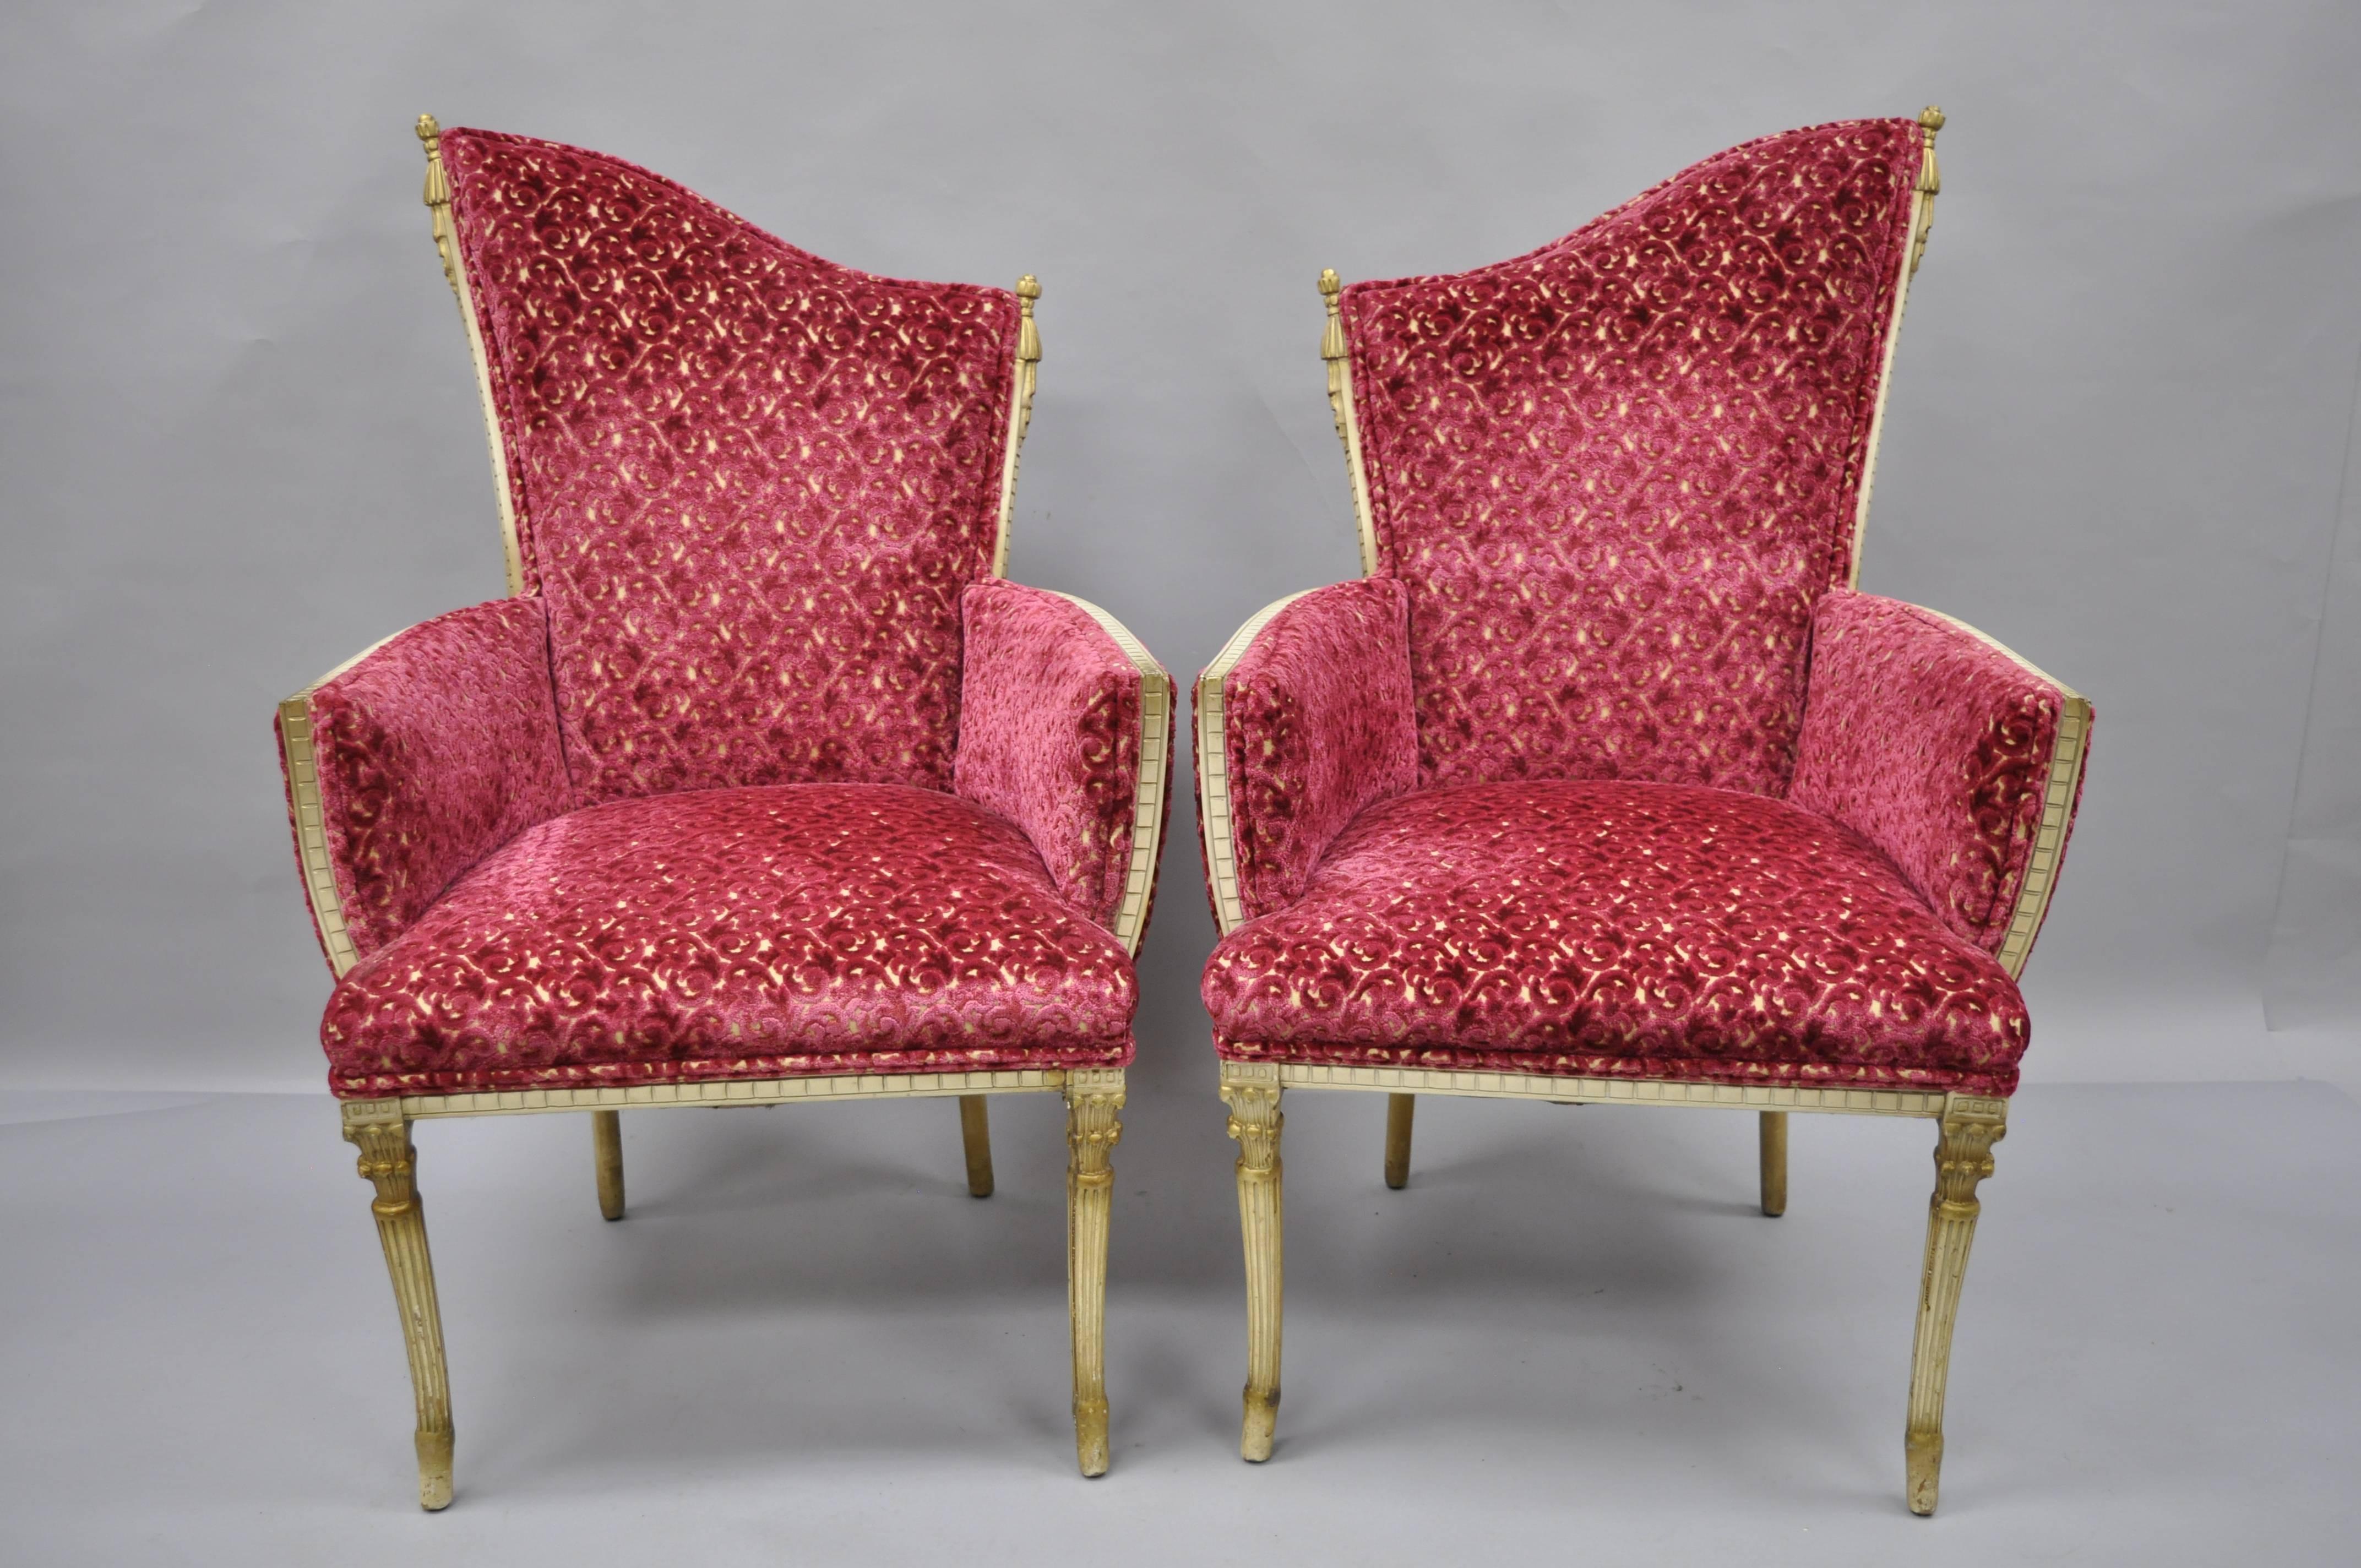 Pair of vintage Hollywood Regency French style carved tassel armchairs in the Dorothy Draper style. Item features solid wood construction, nicely carved tassel details, tapered legs, cream and gold painted finish, excellent reddish burgundy and